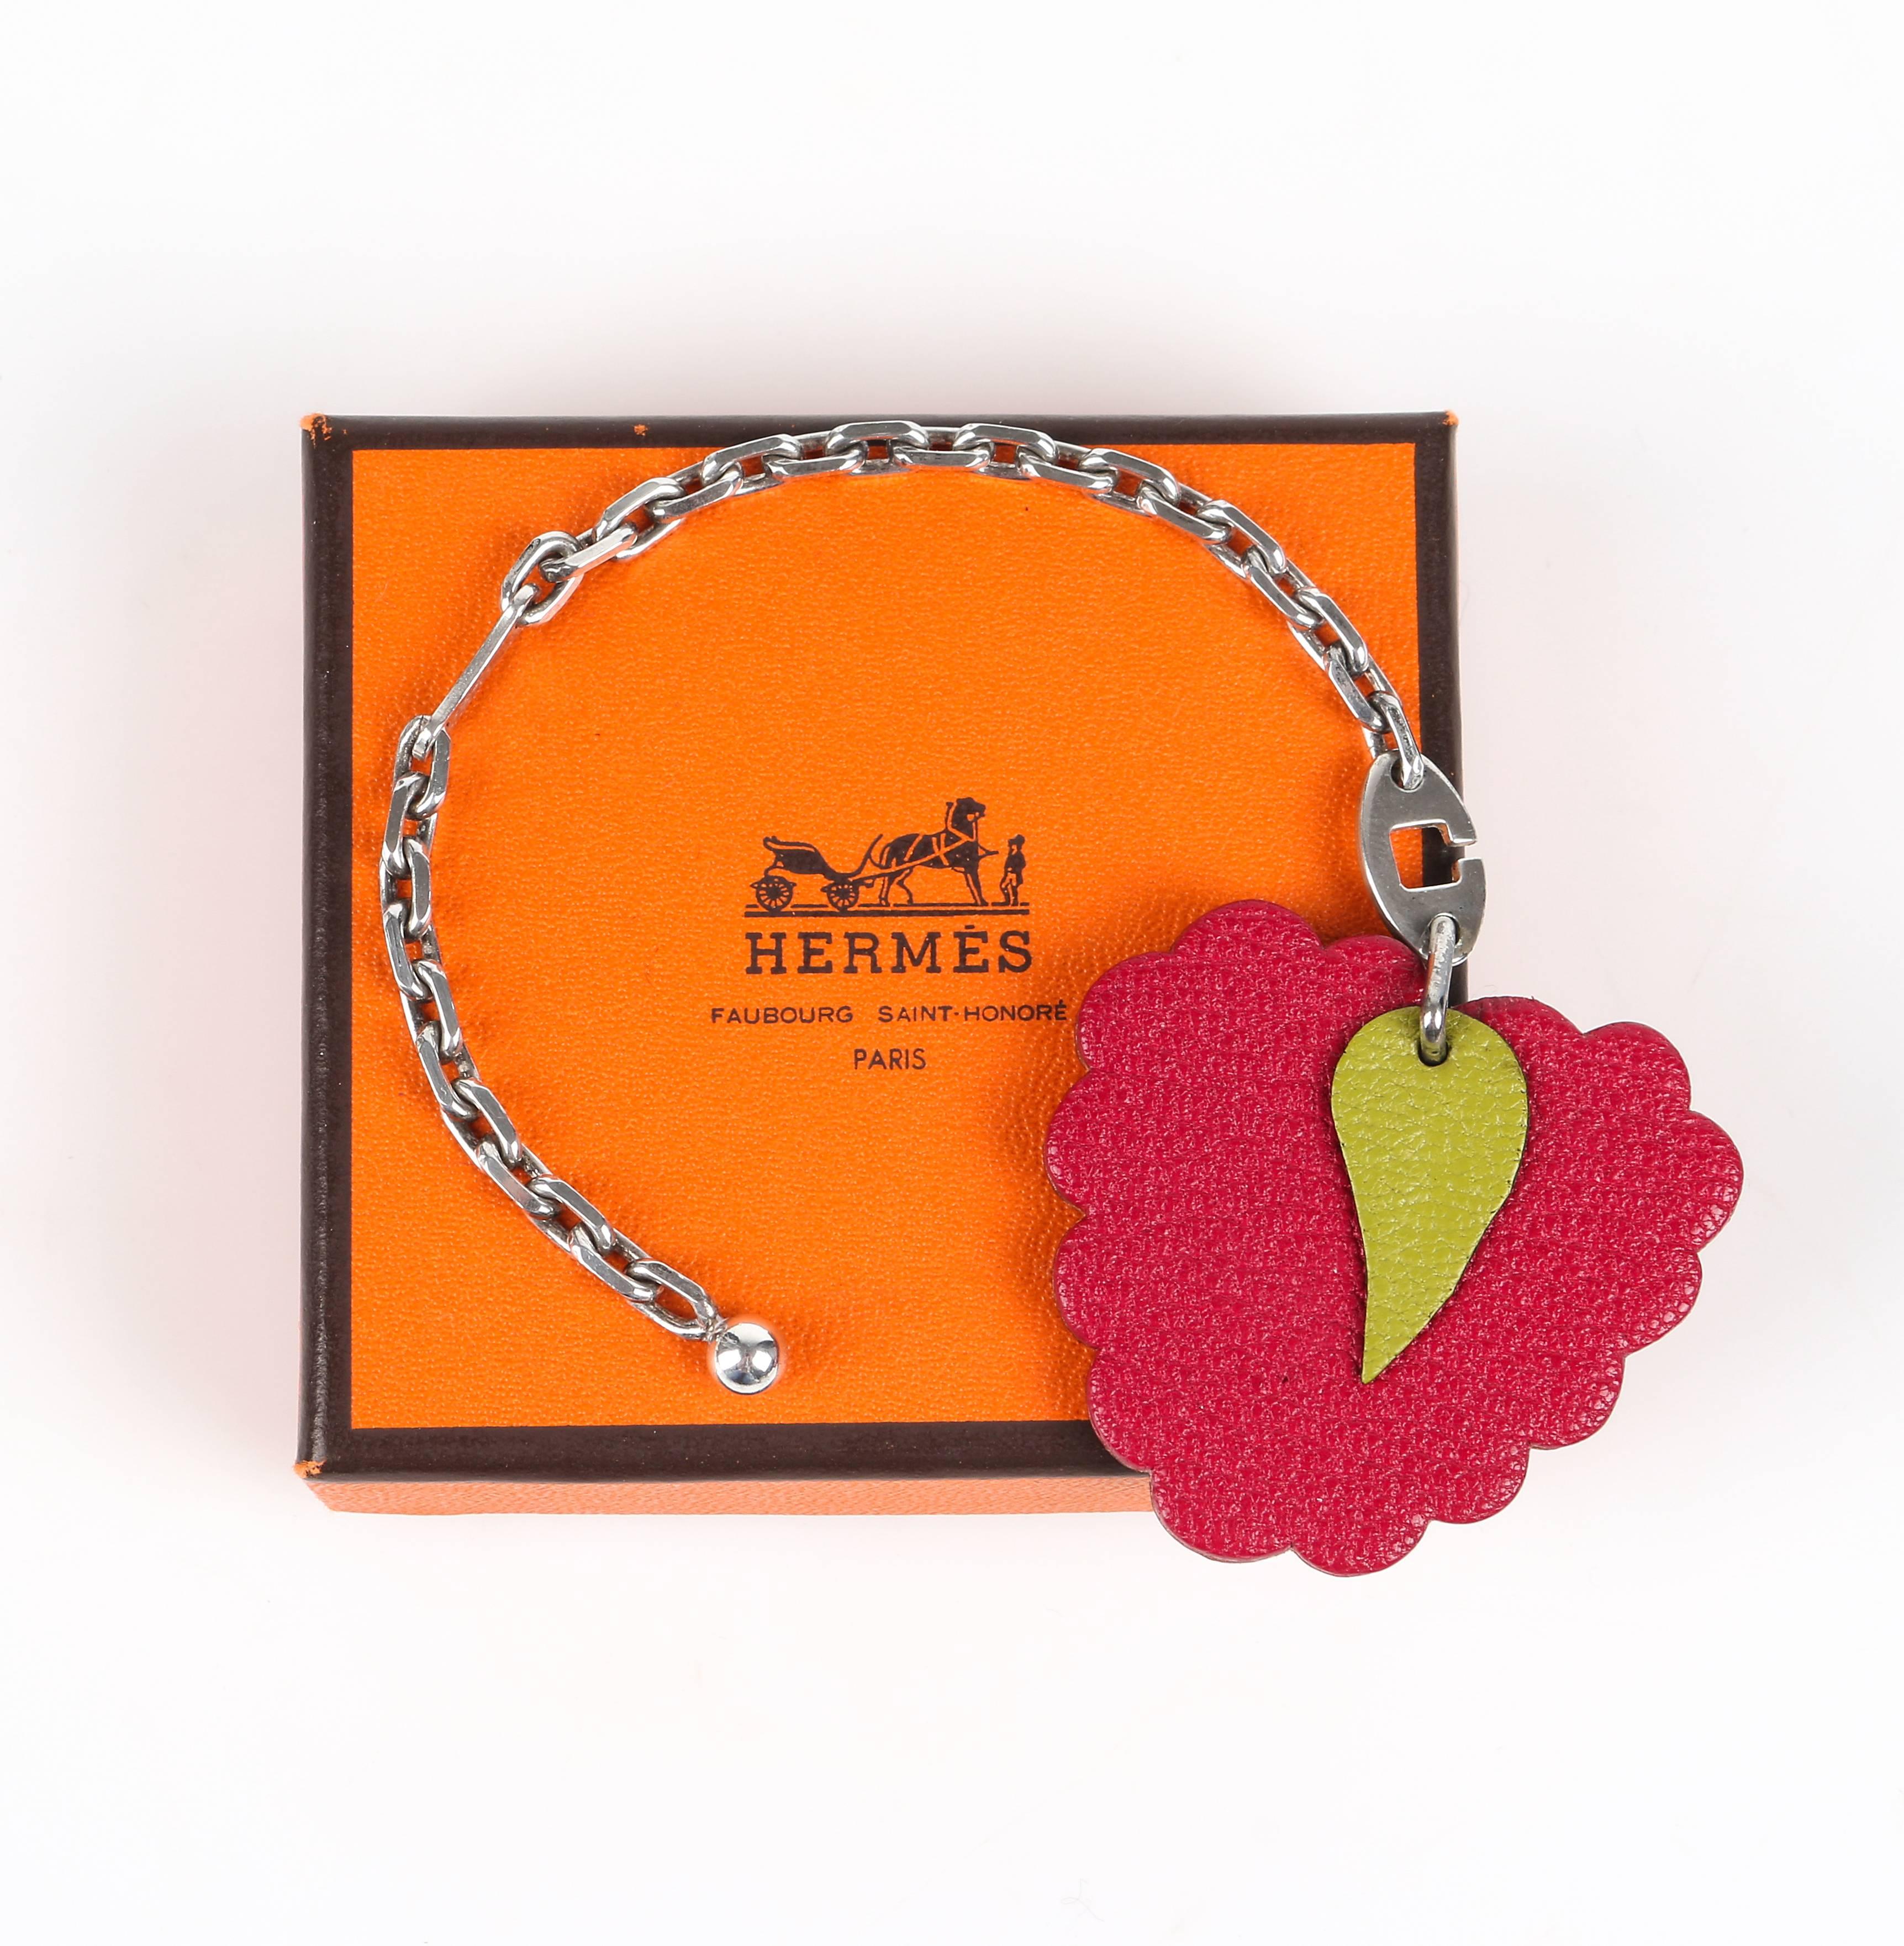 Hermes S/S 2005 leather raspberry motif bag charm key chain.  Designed by Jean Paul Gaultier.  Sterling silver drawn cable chain.  Hermes Paris stamp on reverse side of leaf.  Signed chain.  Marked Material: 